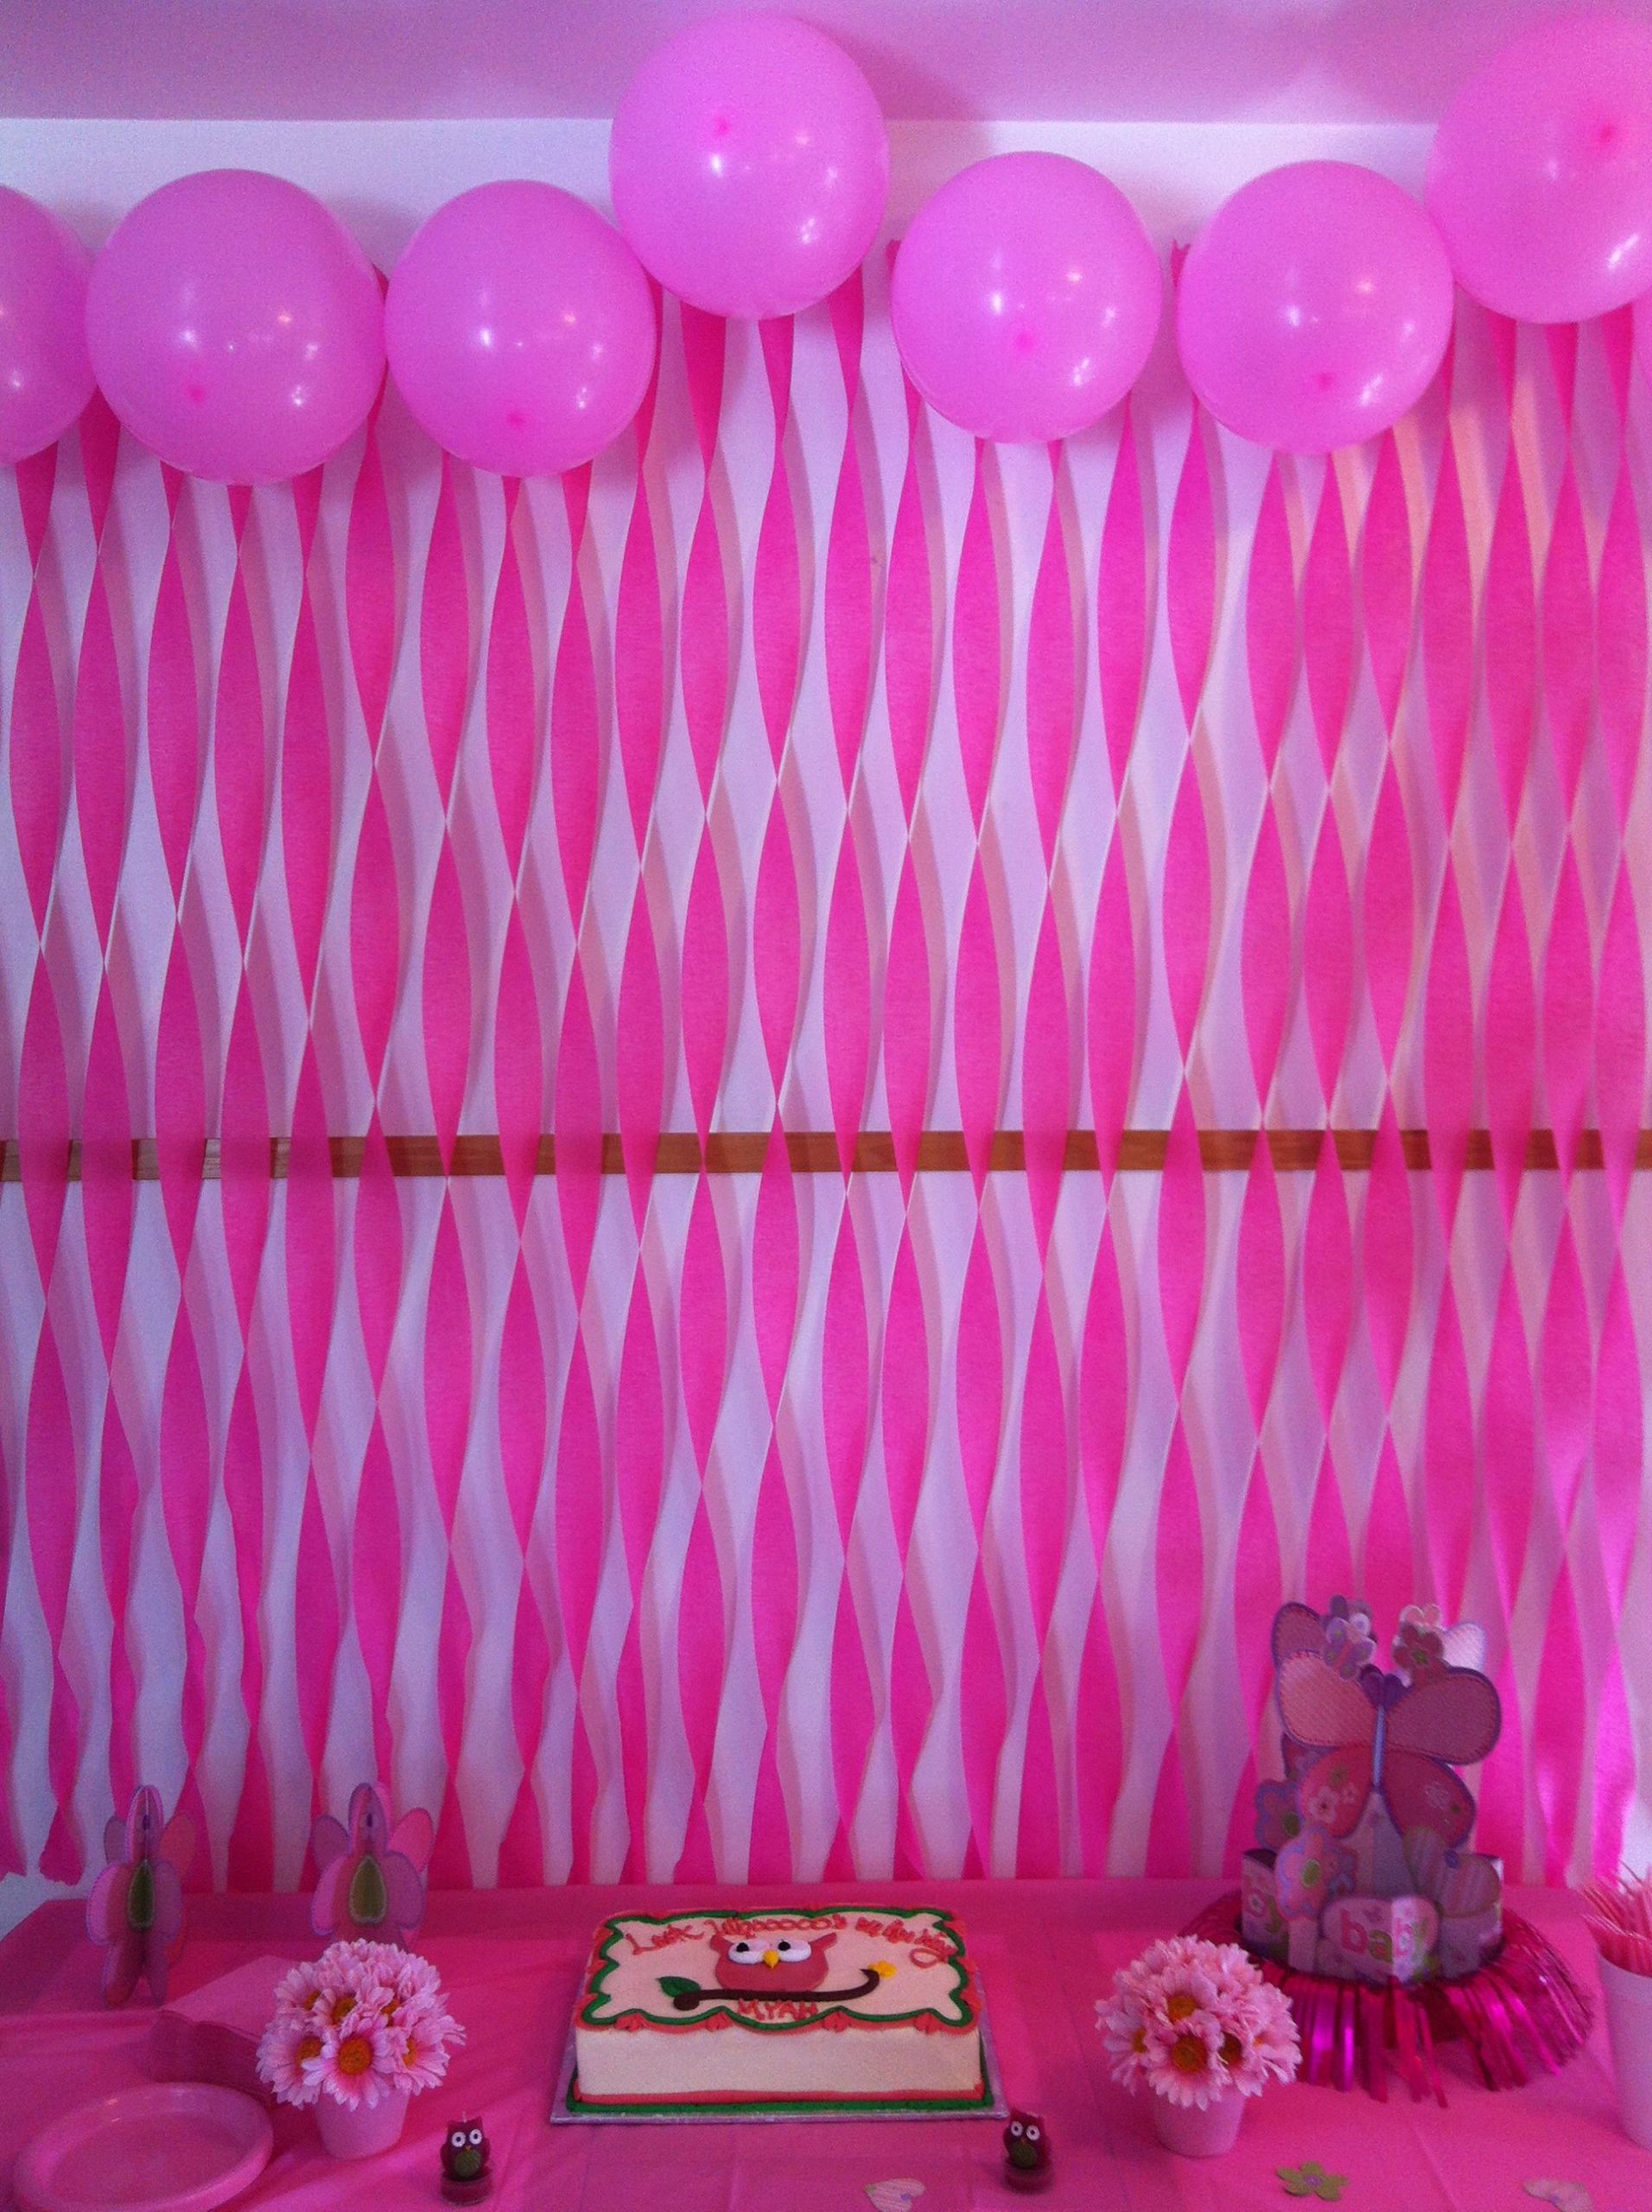 Streamer Decoration Ideas For Birthday Party
 Party Streamer and Balloon Decorations